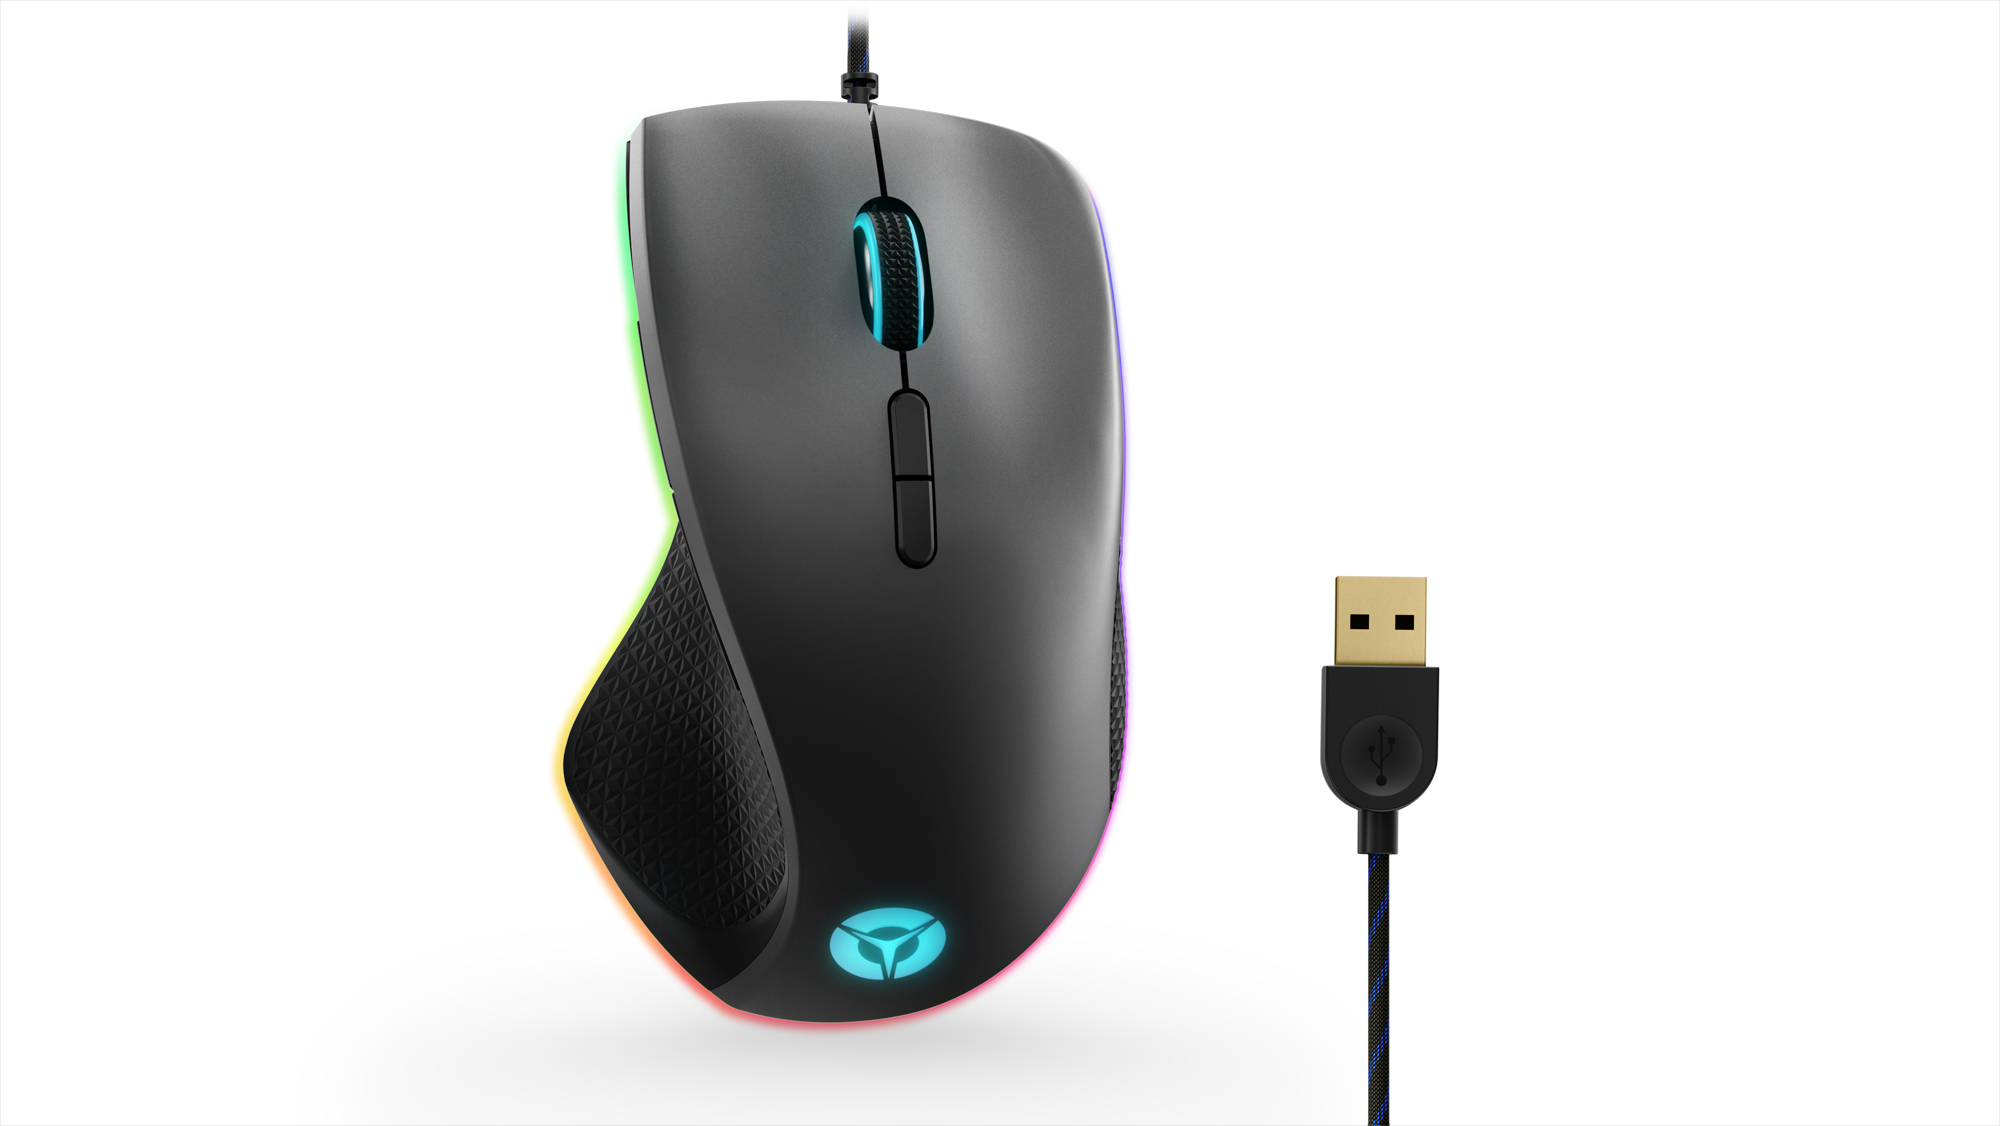 lenovo announce new legion gaming peripherals ces 2019 13 m500 front facing with usb